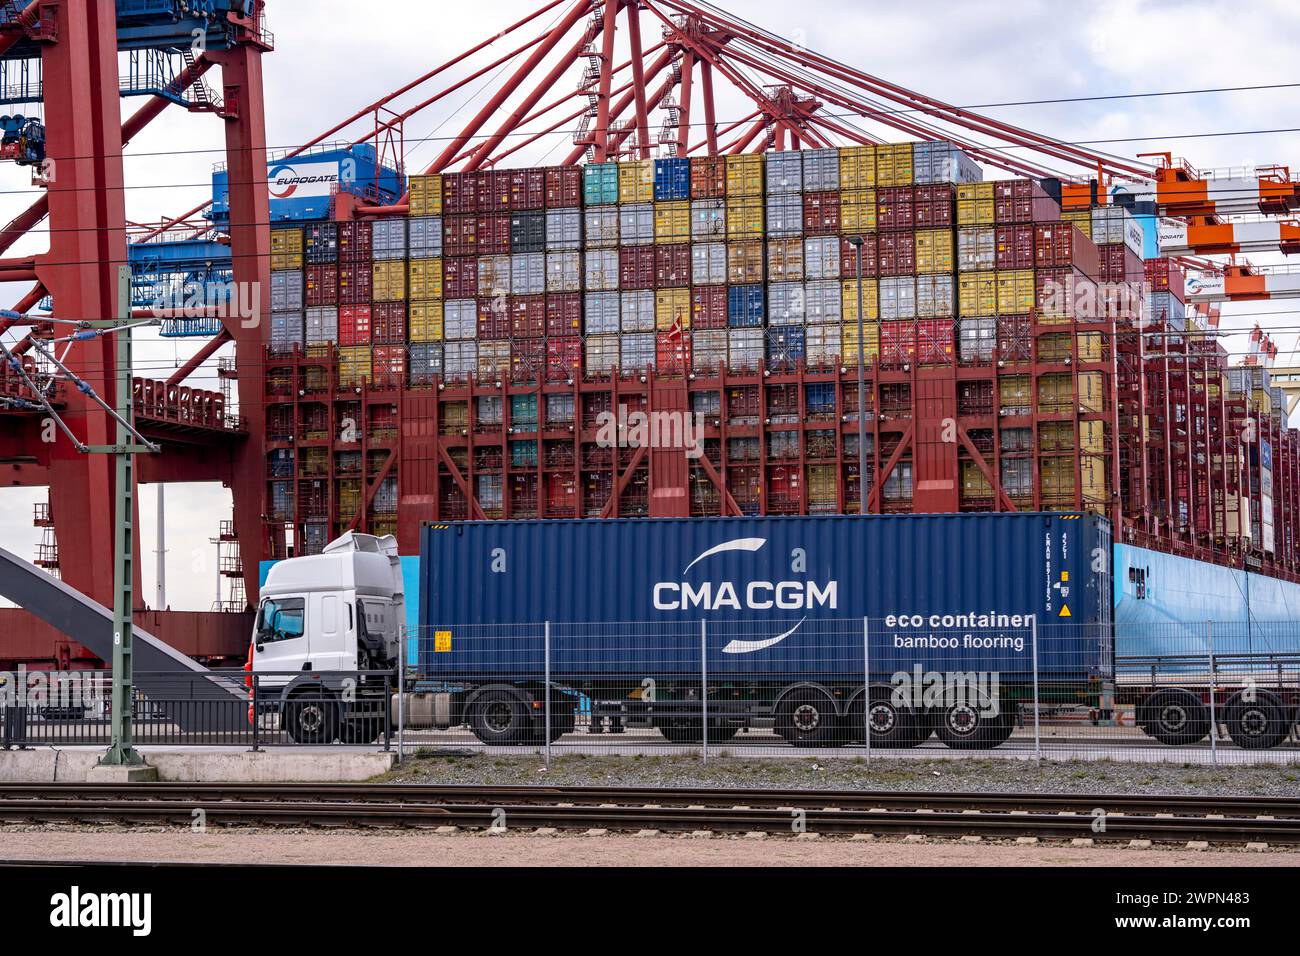 Port of Hamburg, Waltershofer Hafen, container ships, trucks bring and collect freight containers to and from HHLA Container Terminal Burchardkai, Ham Stock Photo